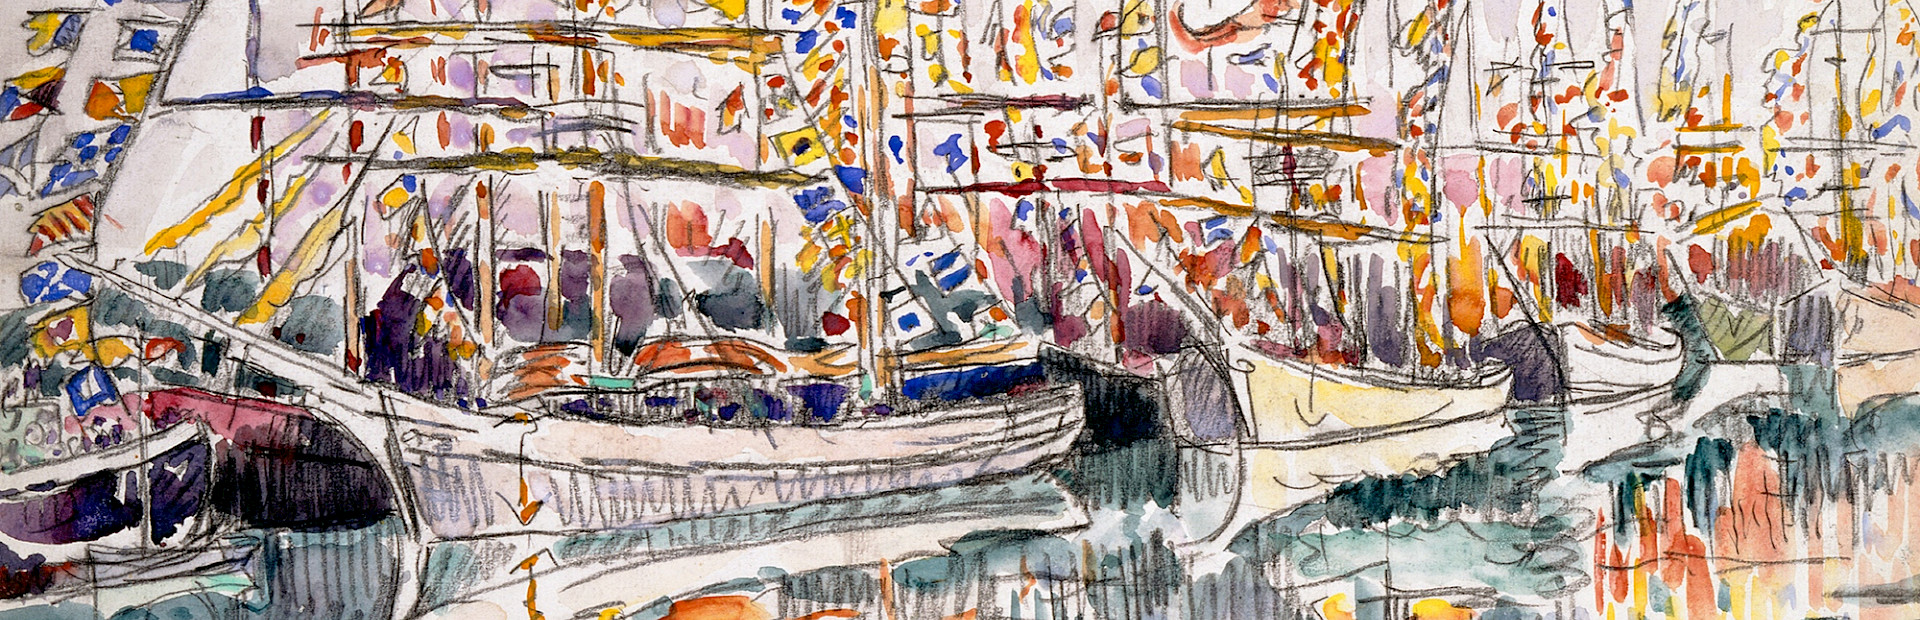 Watercolor painting of several ships in a bay with dozens of flags flowing in the wind from their sails.